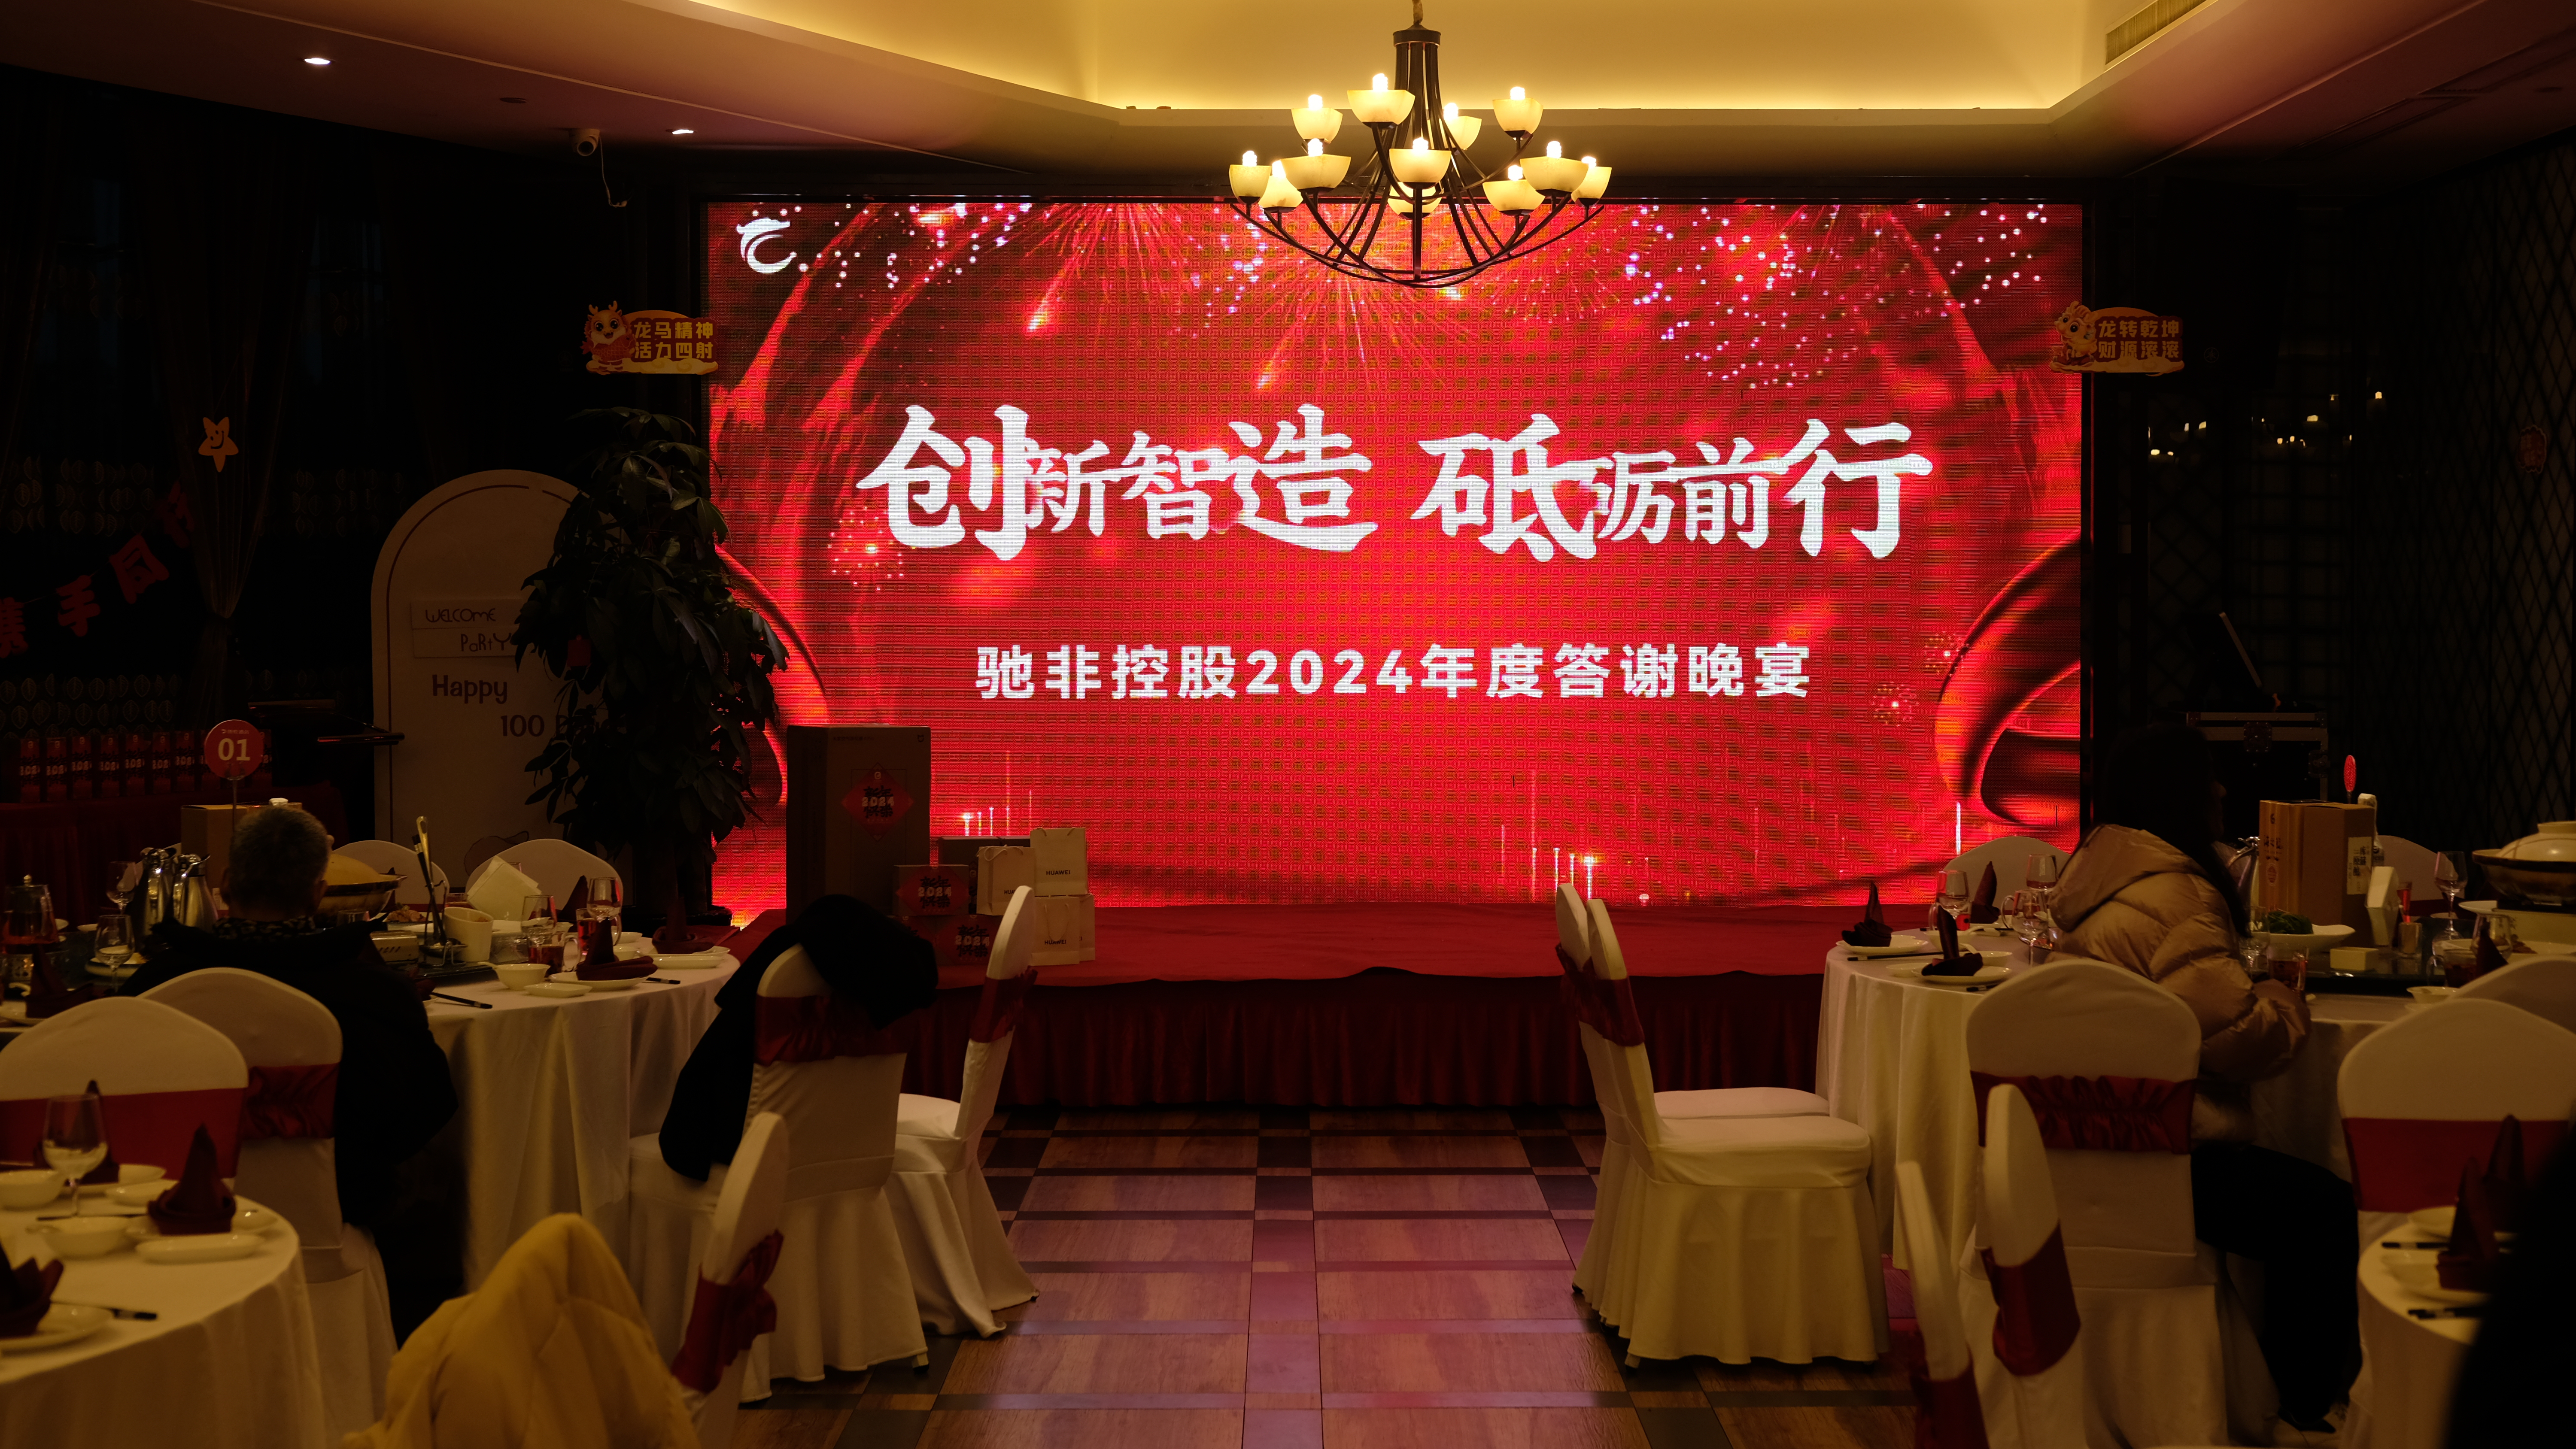 Celebration of the Chinese New Year in Hangzhou by Chief Holding